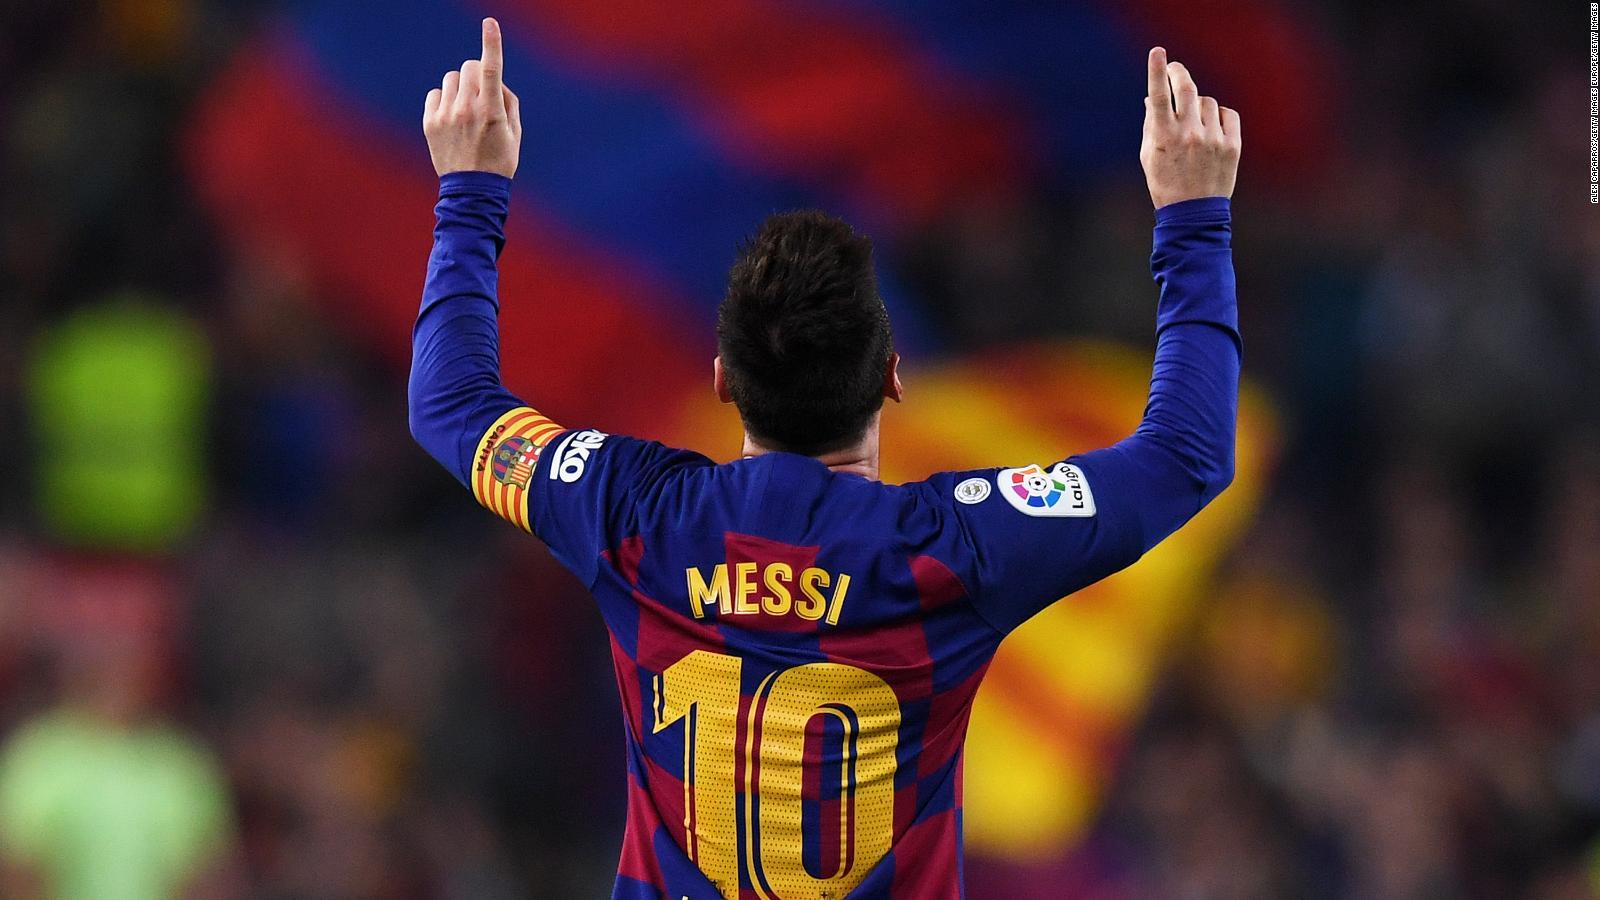 Lionel Messi lifts Barcelona in Champions League last 8